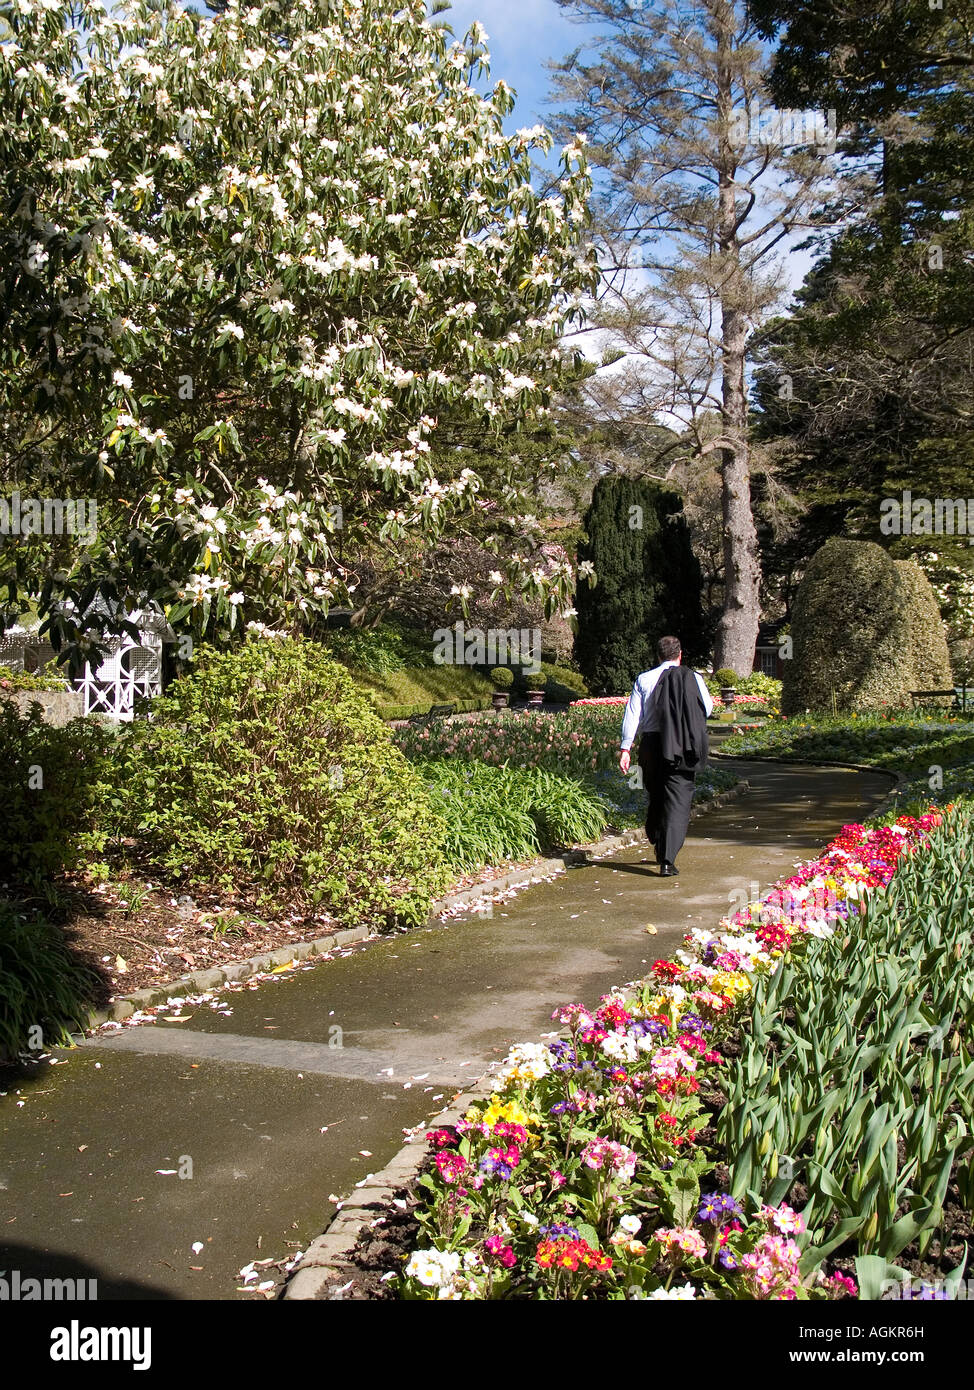 Man in business suit strolls down a garden path with flowering rhododendron primula beds and topiary Wellington NZ Stock Photo